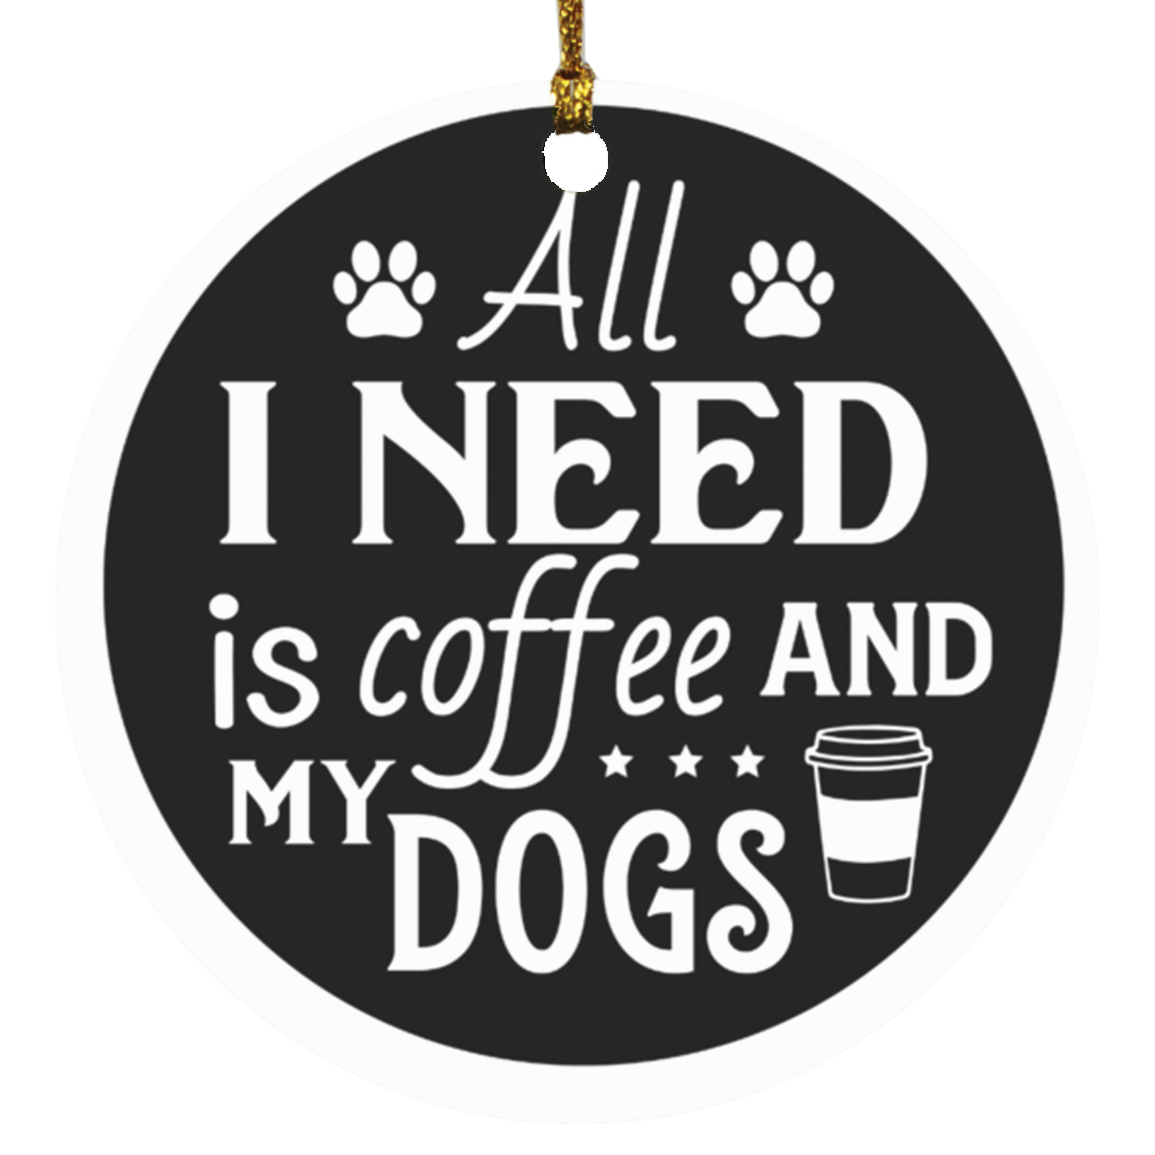 All I need is coffee and my dogs